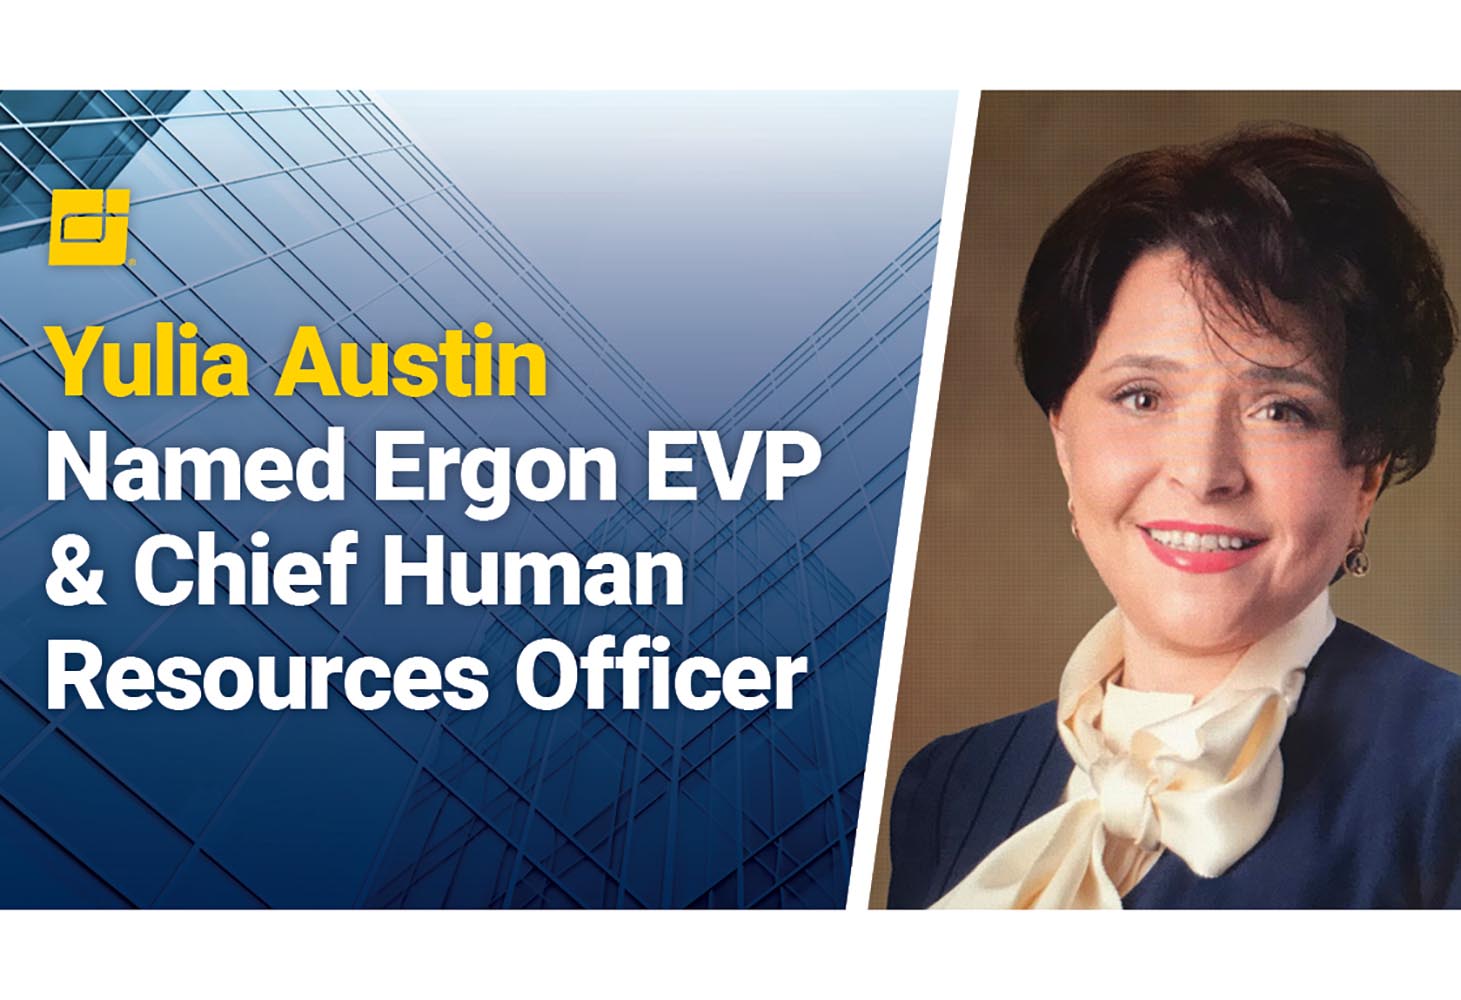 Yulia Austin joins Ergon as chief human resources officer